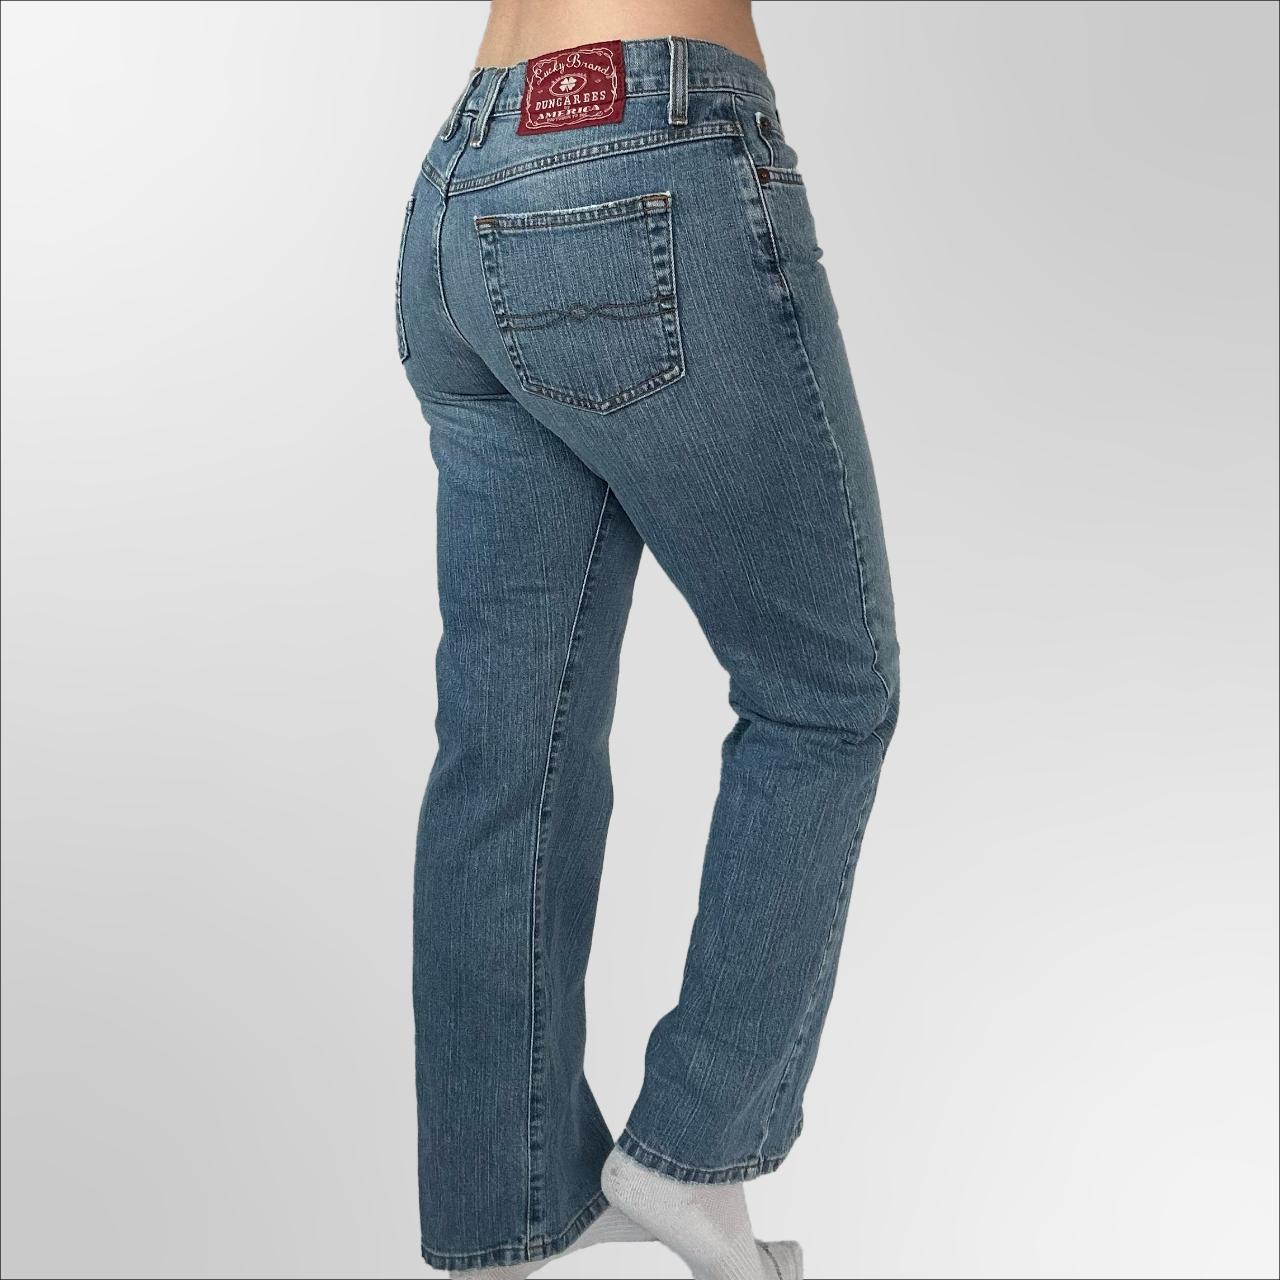 Y2K LUCKY BRAND DUNGAREES JEANS, these are so